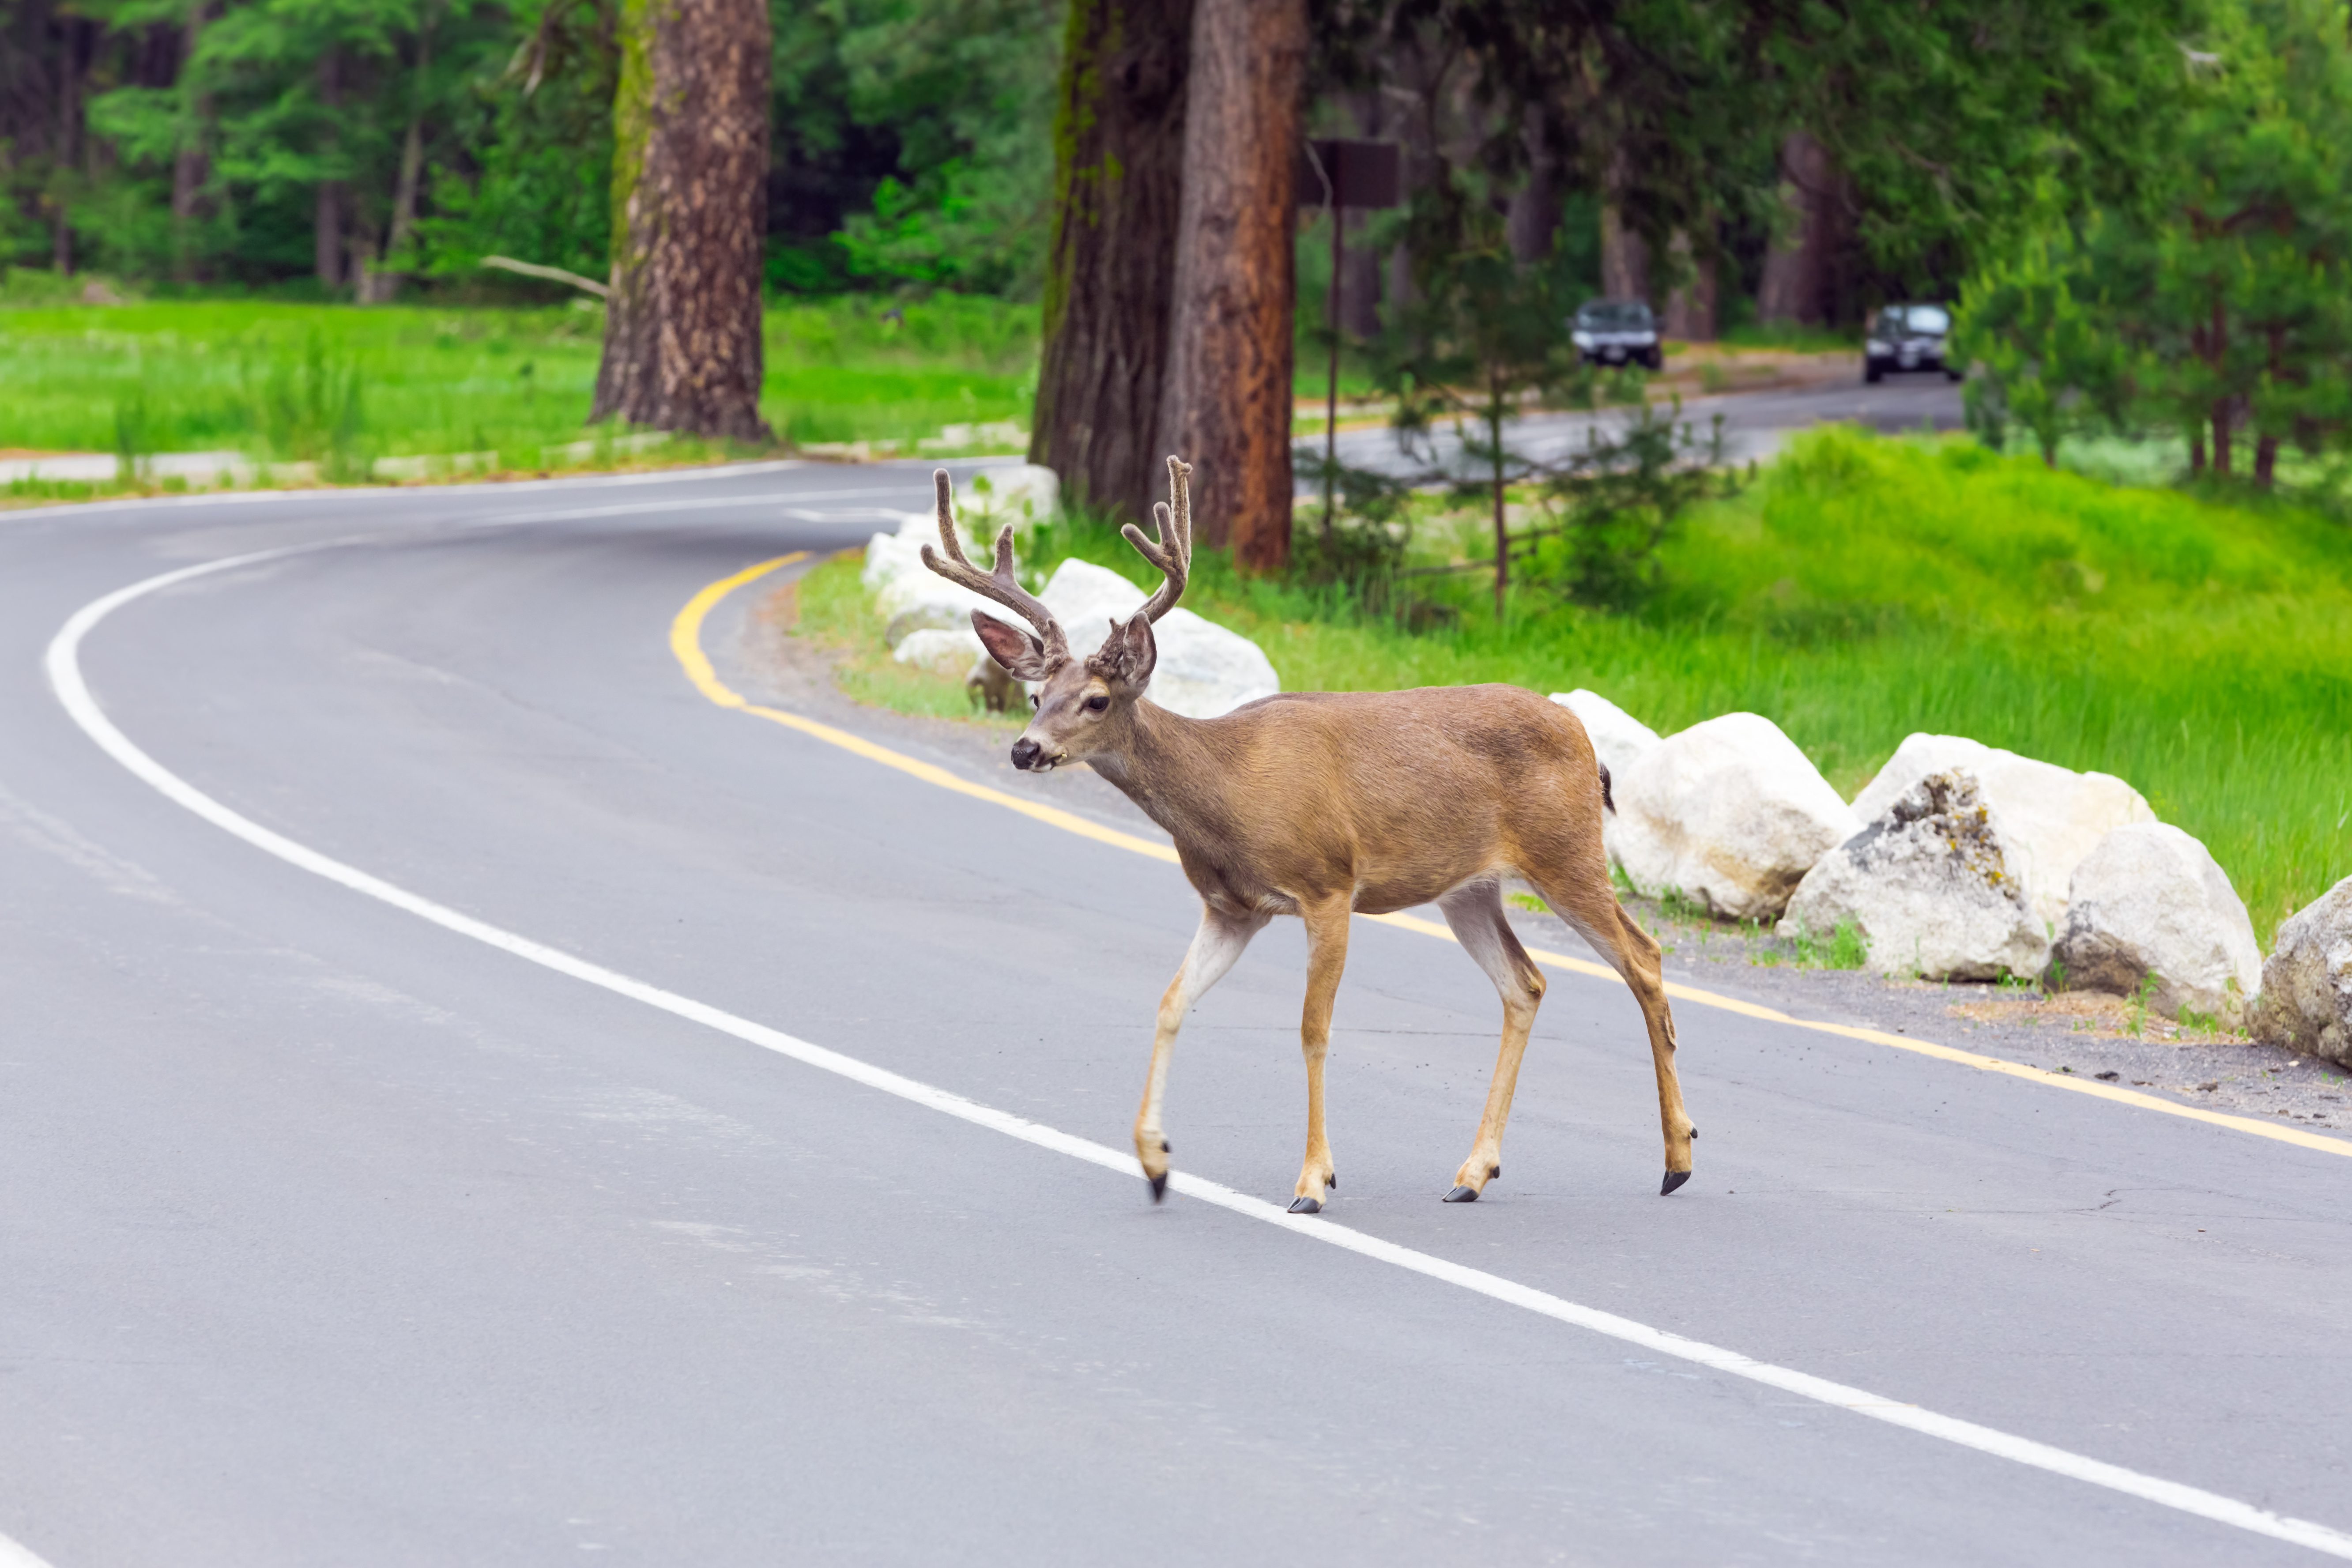 Deer on the road? Here's what to do